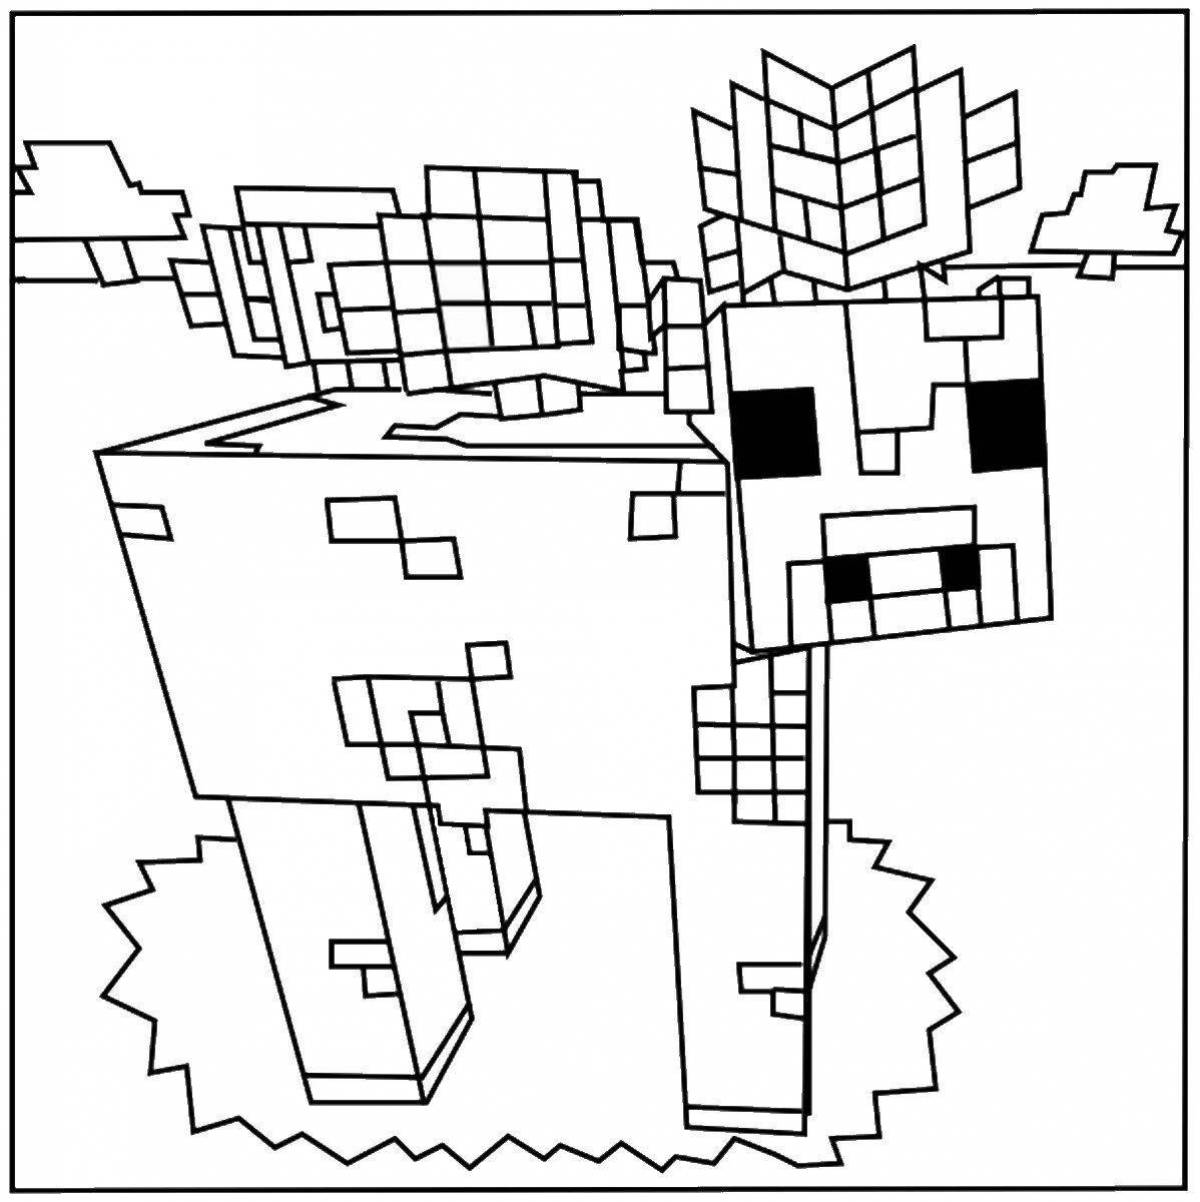 Coloring minecraft for children 5-6 years old